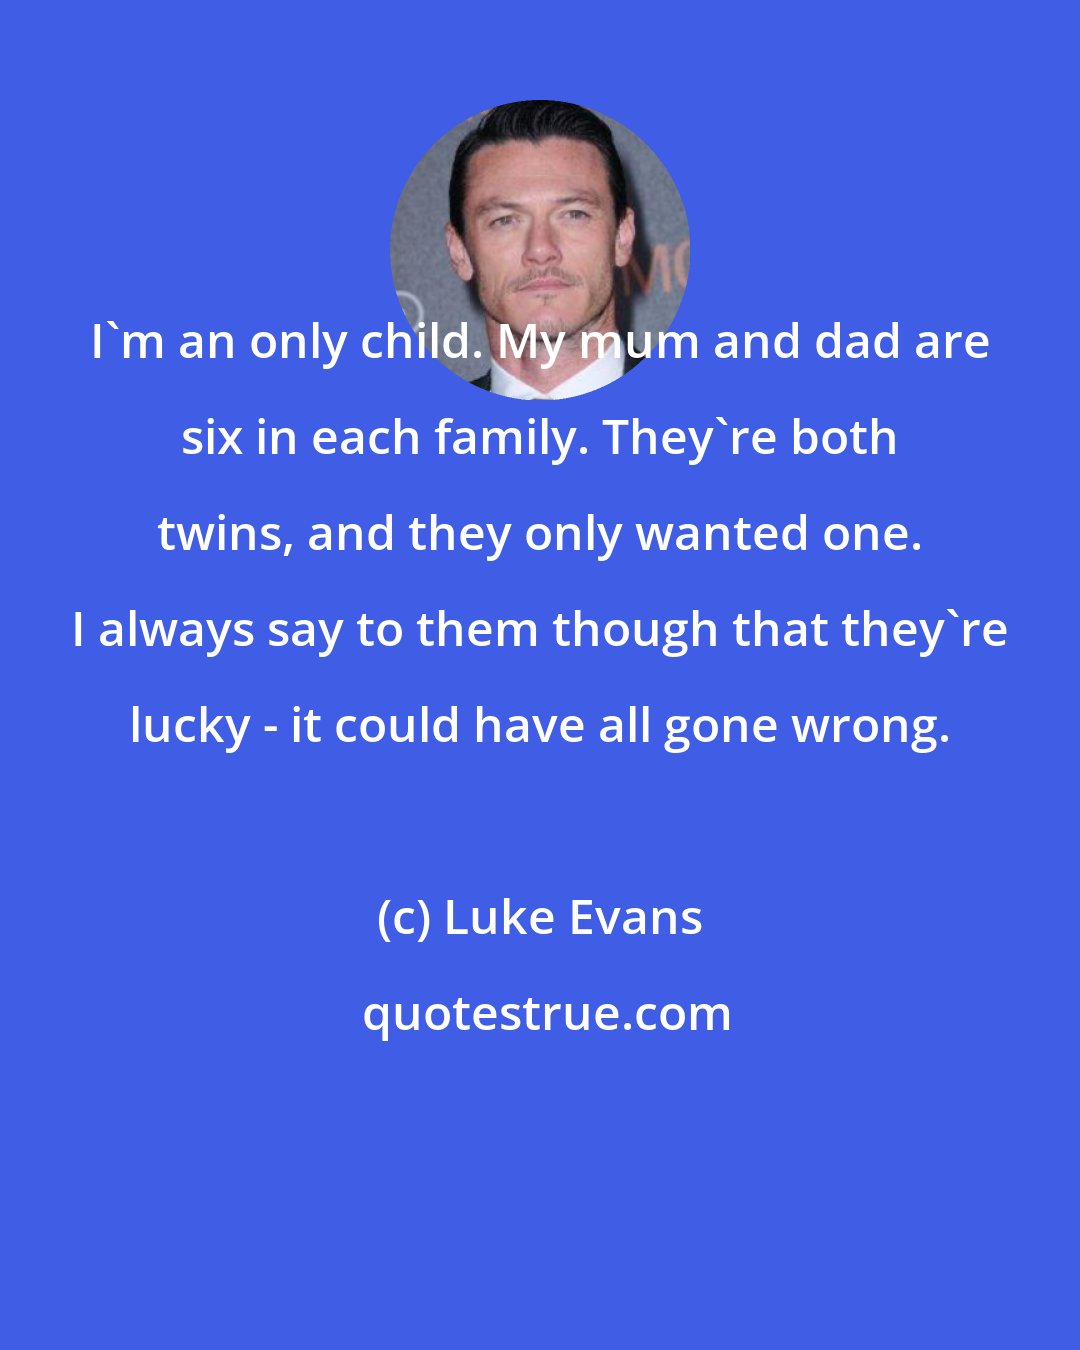 Luke Evans: I'm an only child. My mum and dad are six in each family. They're both twins, and they only wanted one. I always say to them though that they're lucky - it could have all gone wrong.